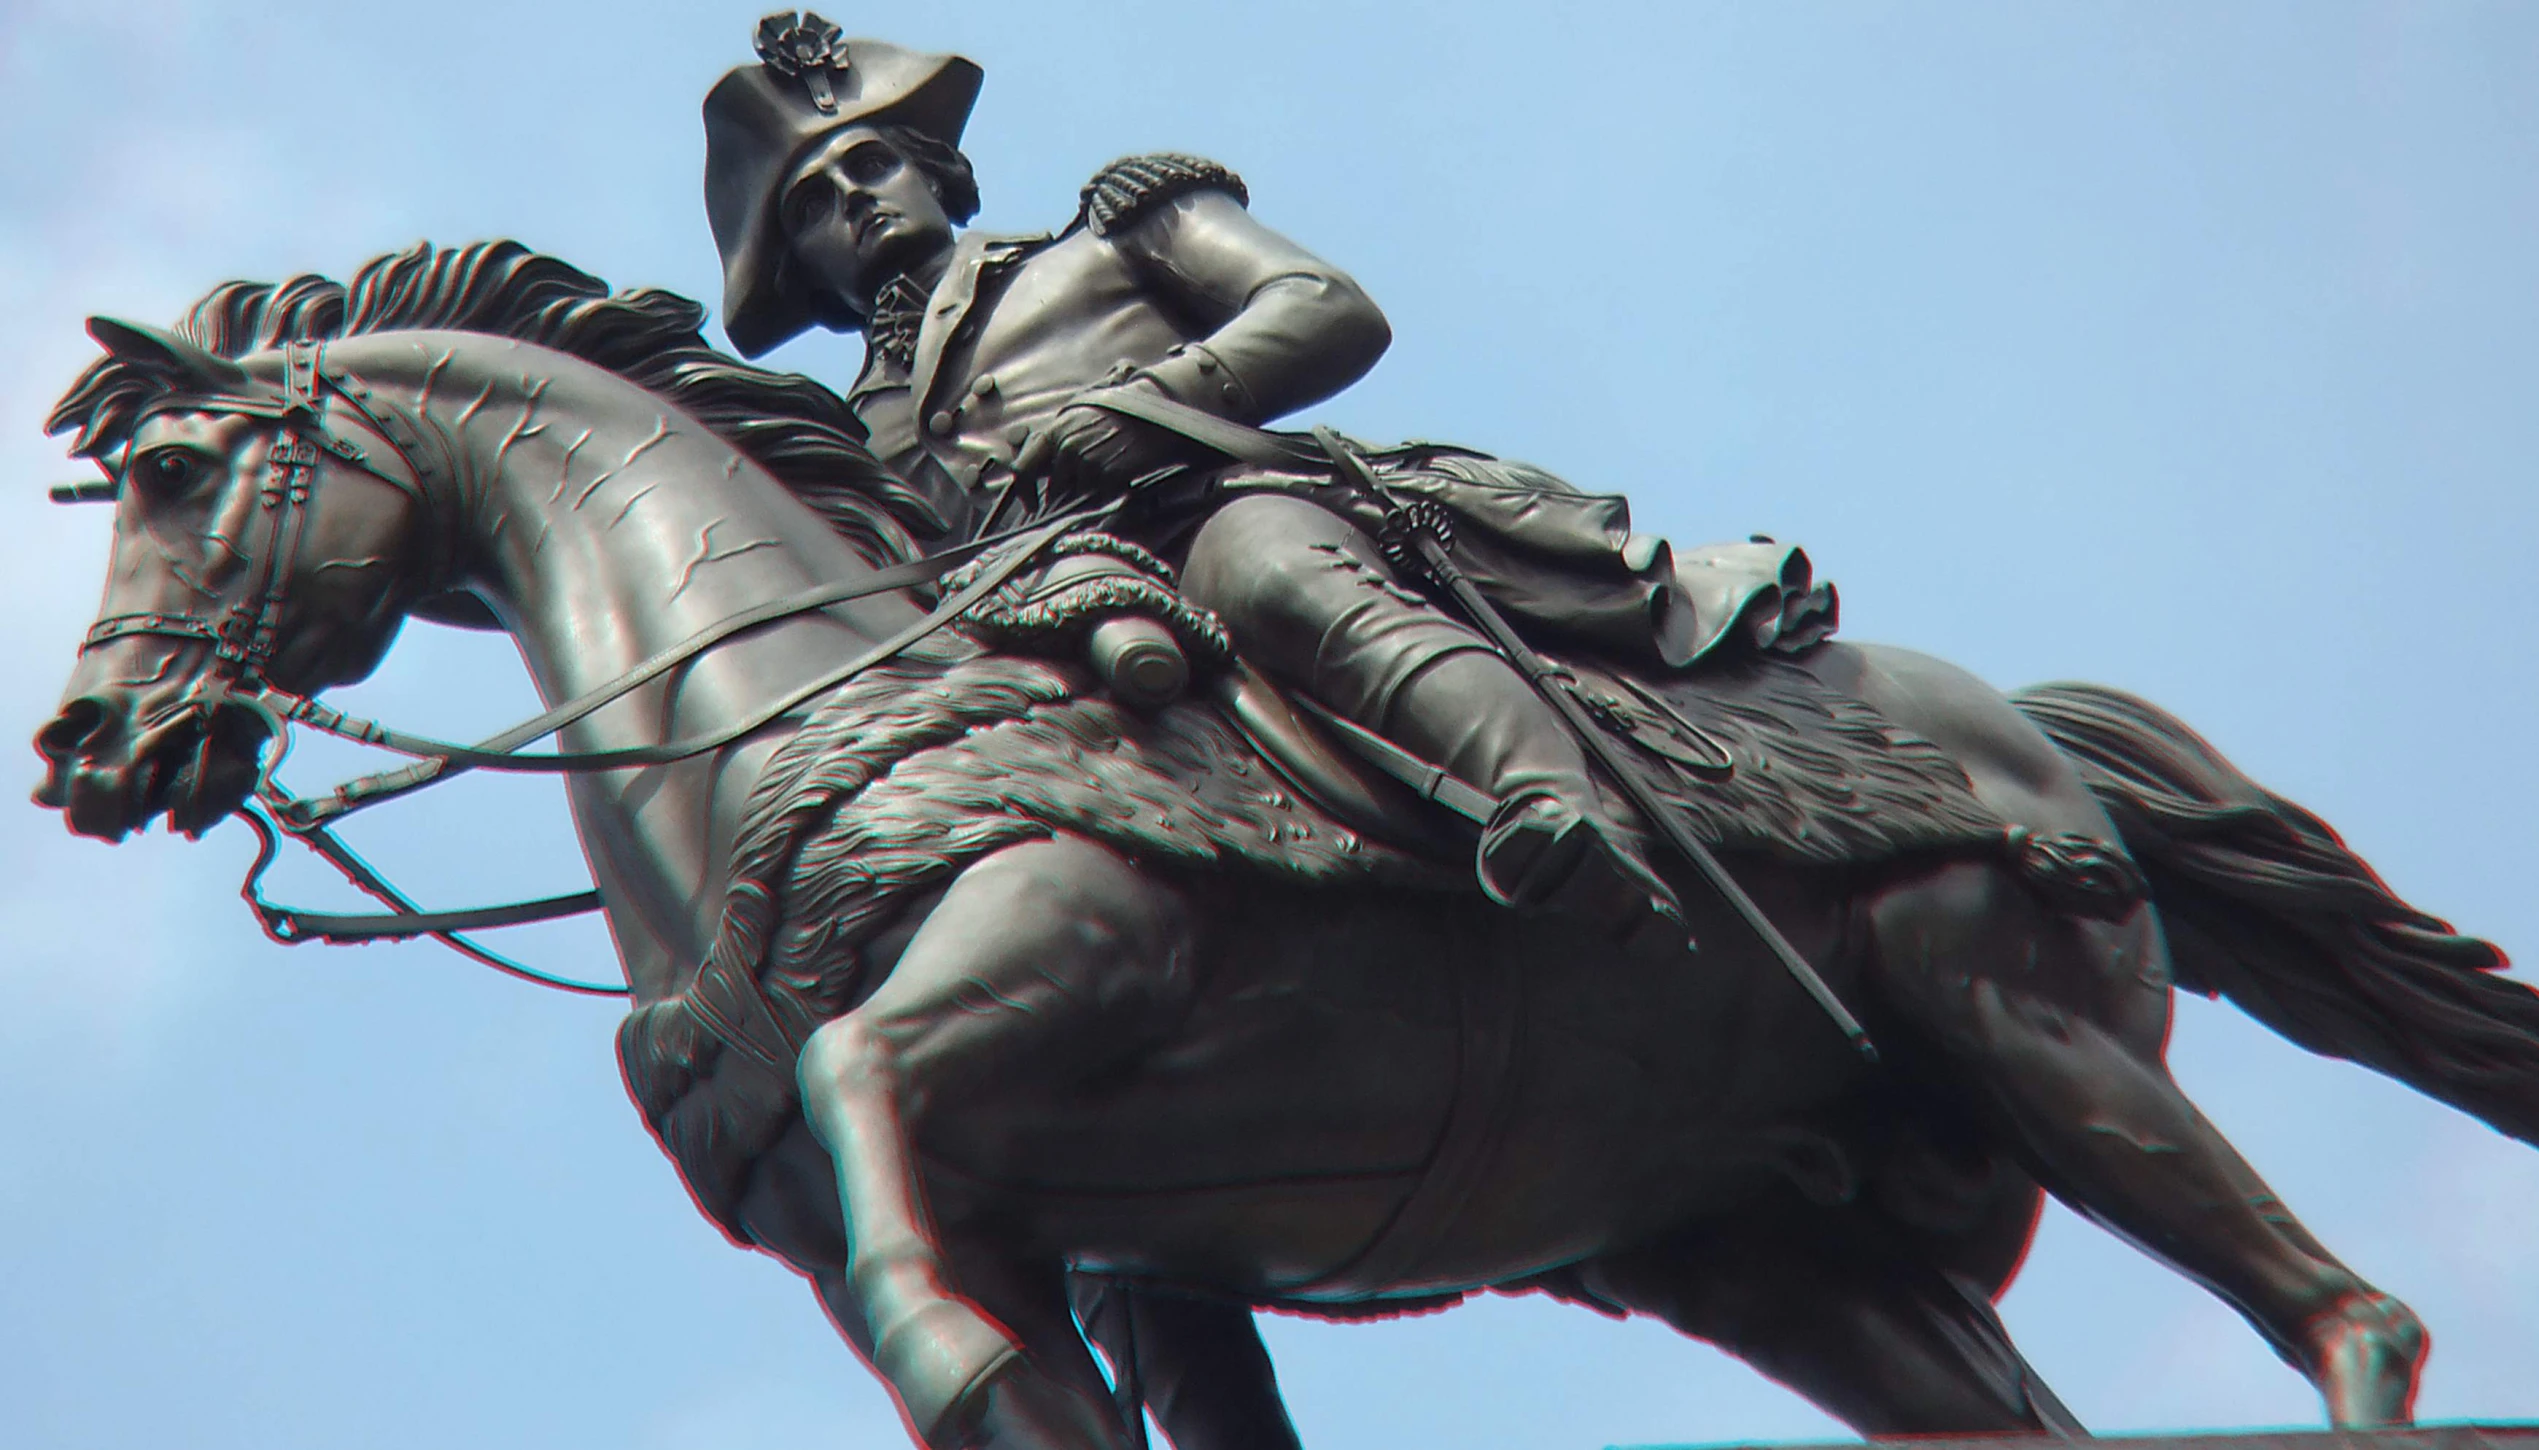 a statue of a person riding on top of a horse